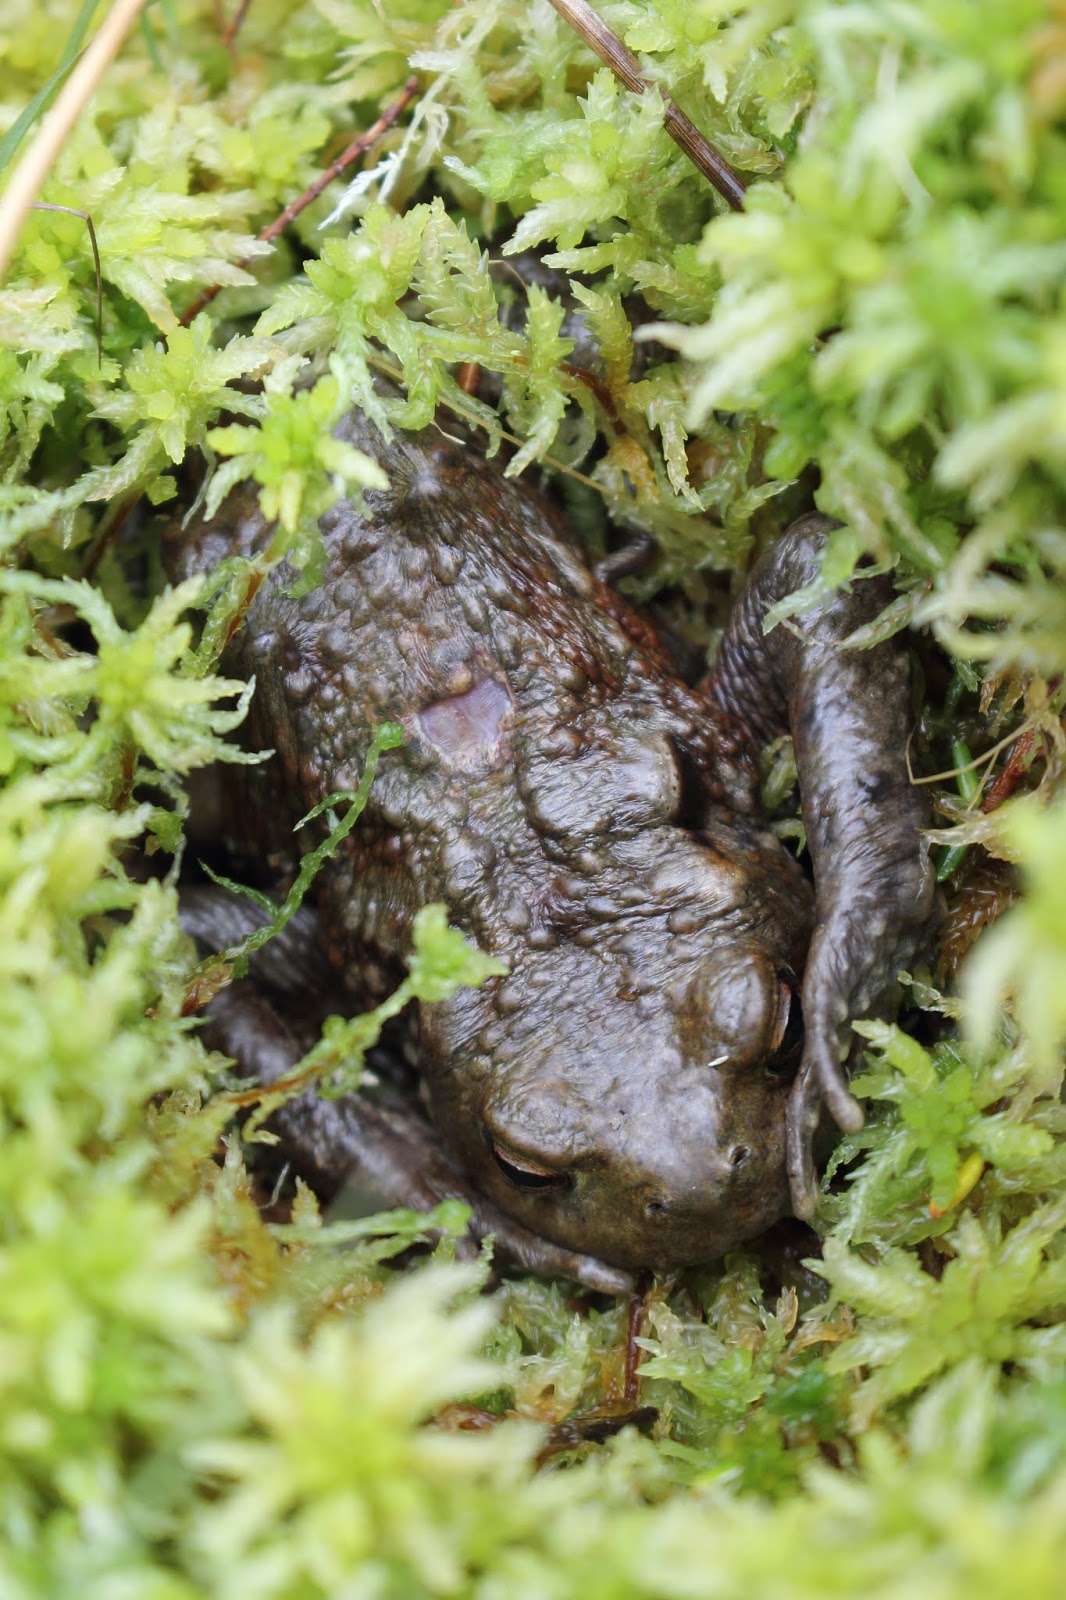 Valley Naturalist: Toad in the hole